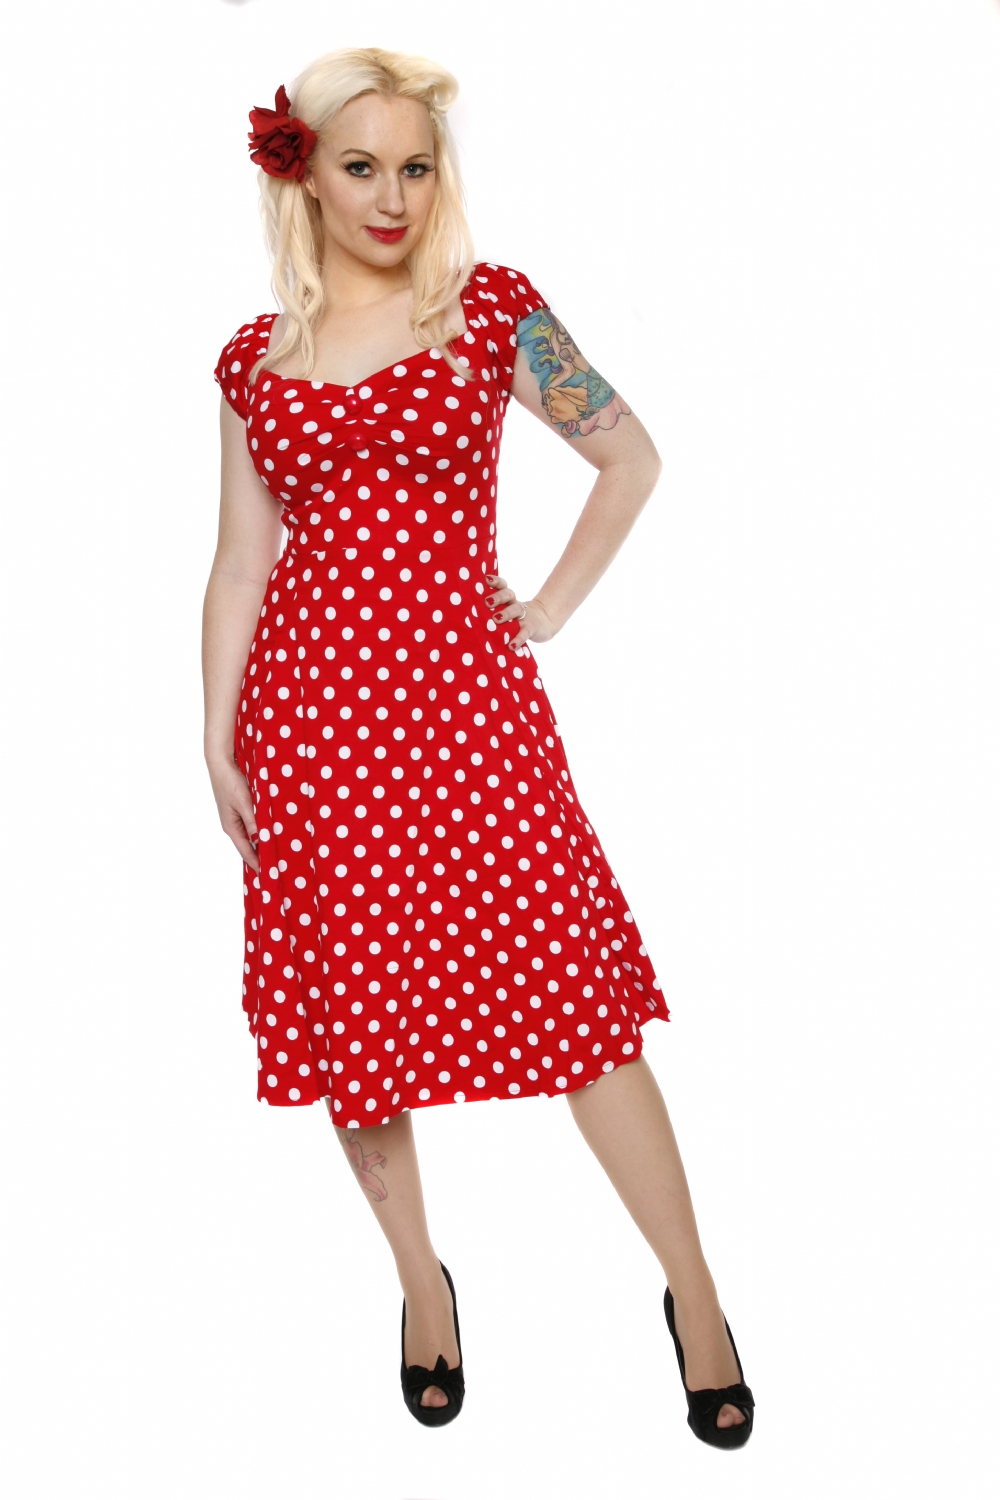 Red Polka Dot Dress Picture Collection